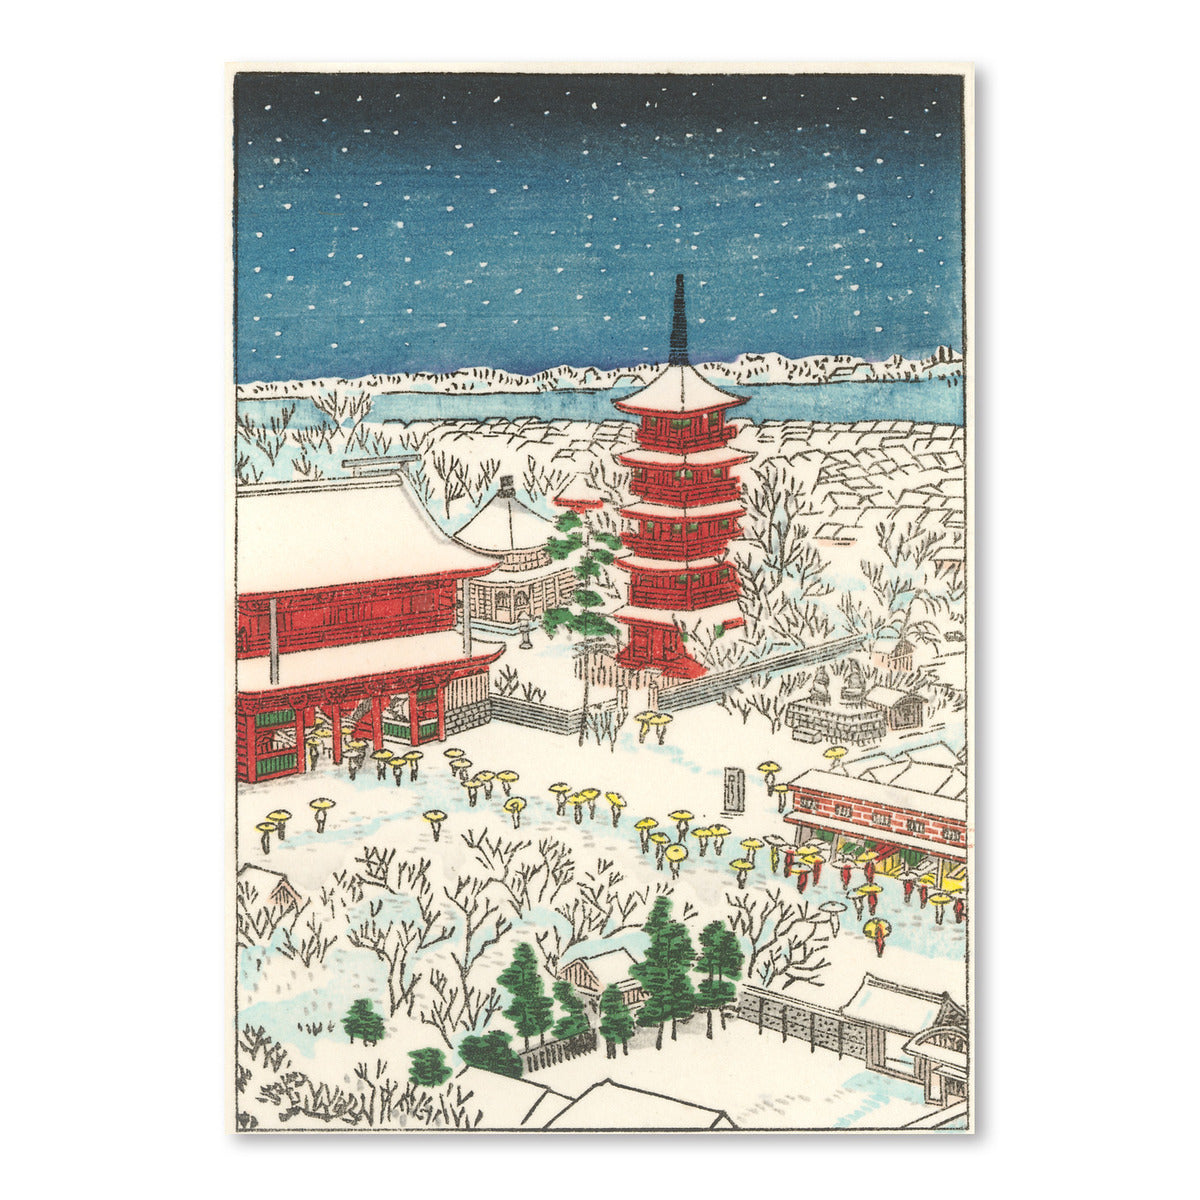 Pagoda In Winter by Found Image Press Art Print - Art Print - Americanflat